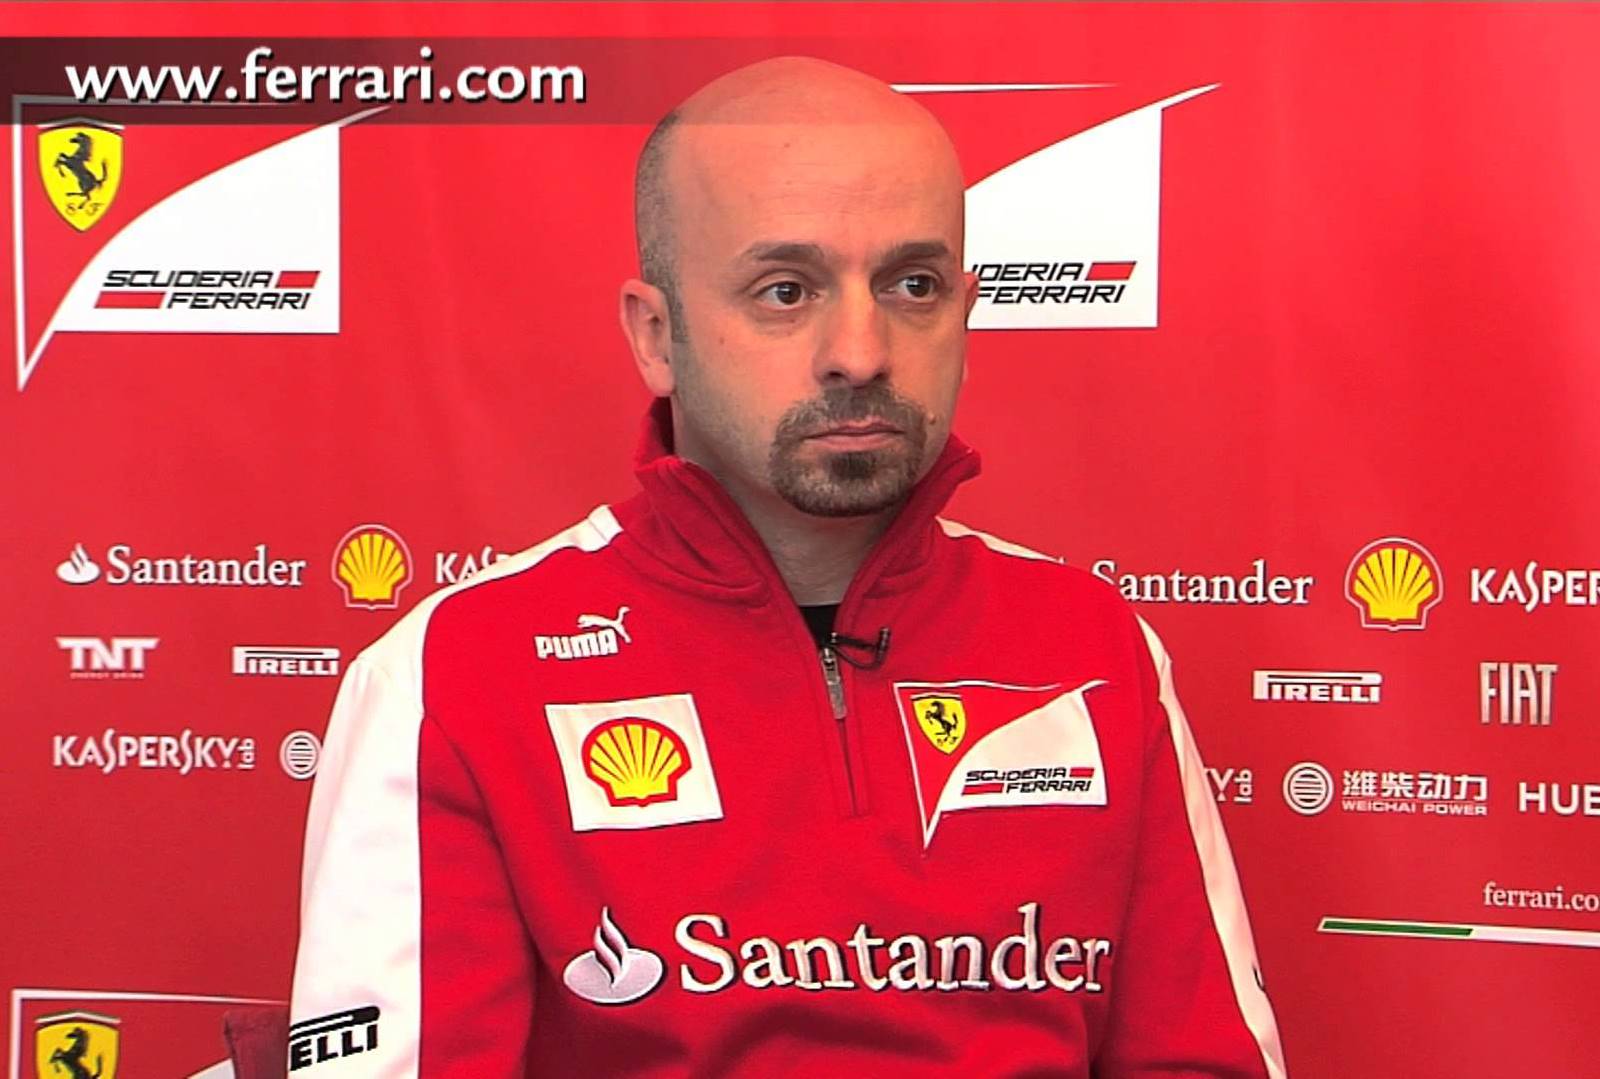 Unable to steal Aldo Costa back from Mercedes, hapless Ferrari regurgitates thru another previously failed designer